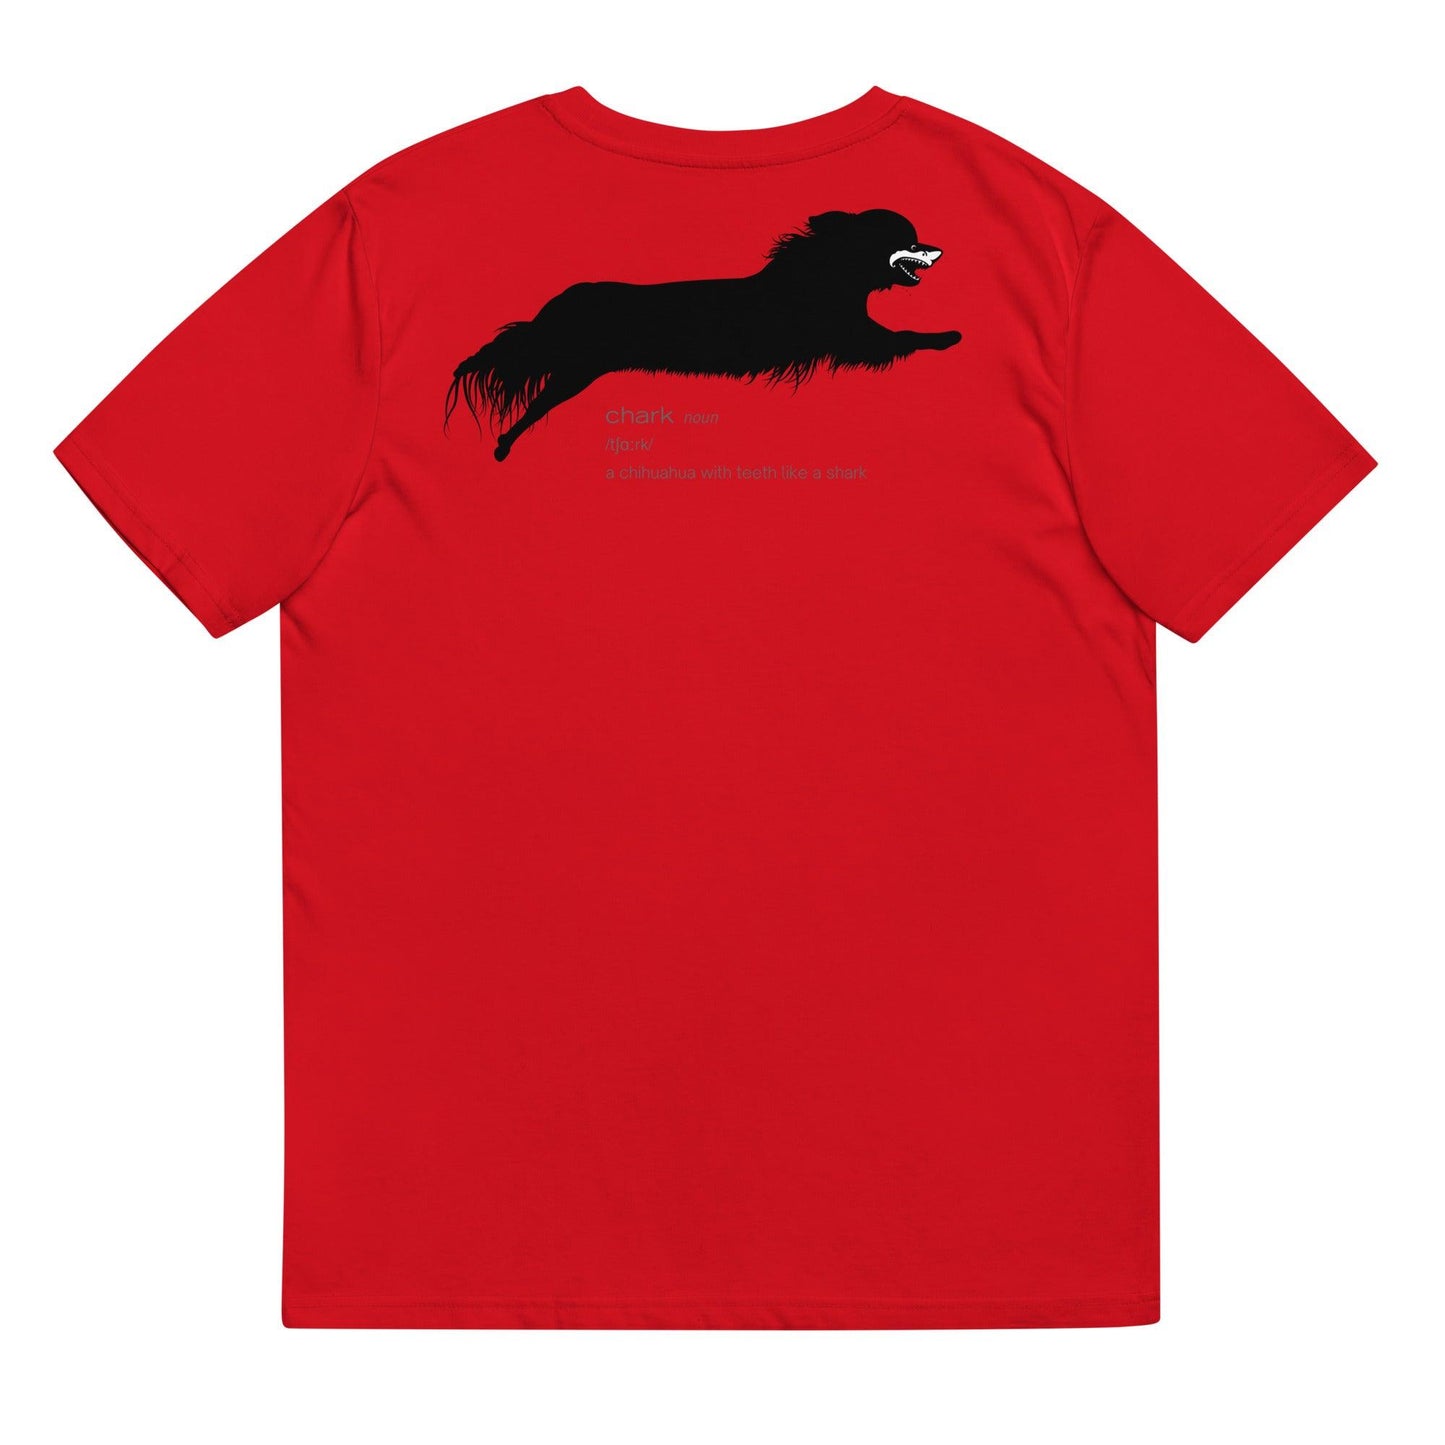 Chihuahua + Shark = Chark unisex t-shirt. Front: black silhouette of a longhaired chihuahua with the face of a great white shark + "Chark"  in cursive font. Back: another shark-faced chihuahua silhouette running across the shoulder blades + dictionary entry of the noun "chark": a chihuahua with teeth like a shark. 100% pure organic cotton. Red. Unisex in sizes for men and women. Design by Renate Kriegler, owner of Chimigos - for the love of chihuahuas. More on chimigos.com